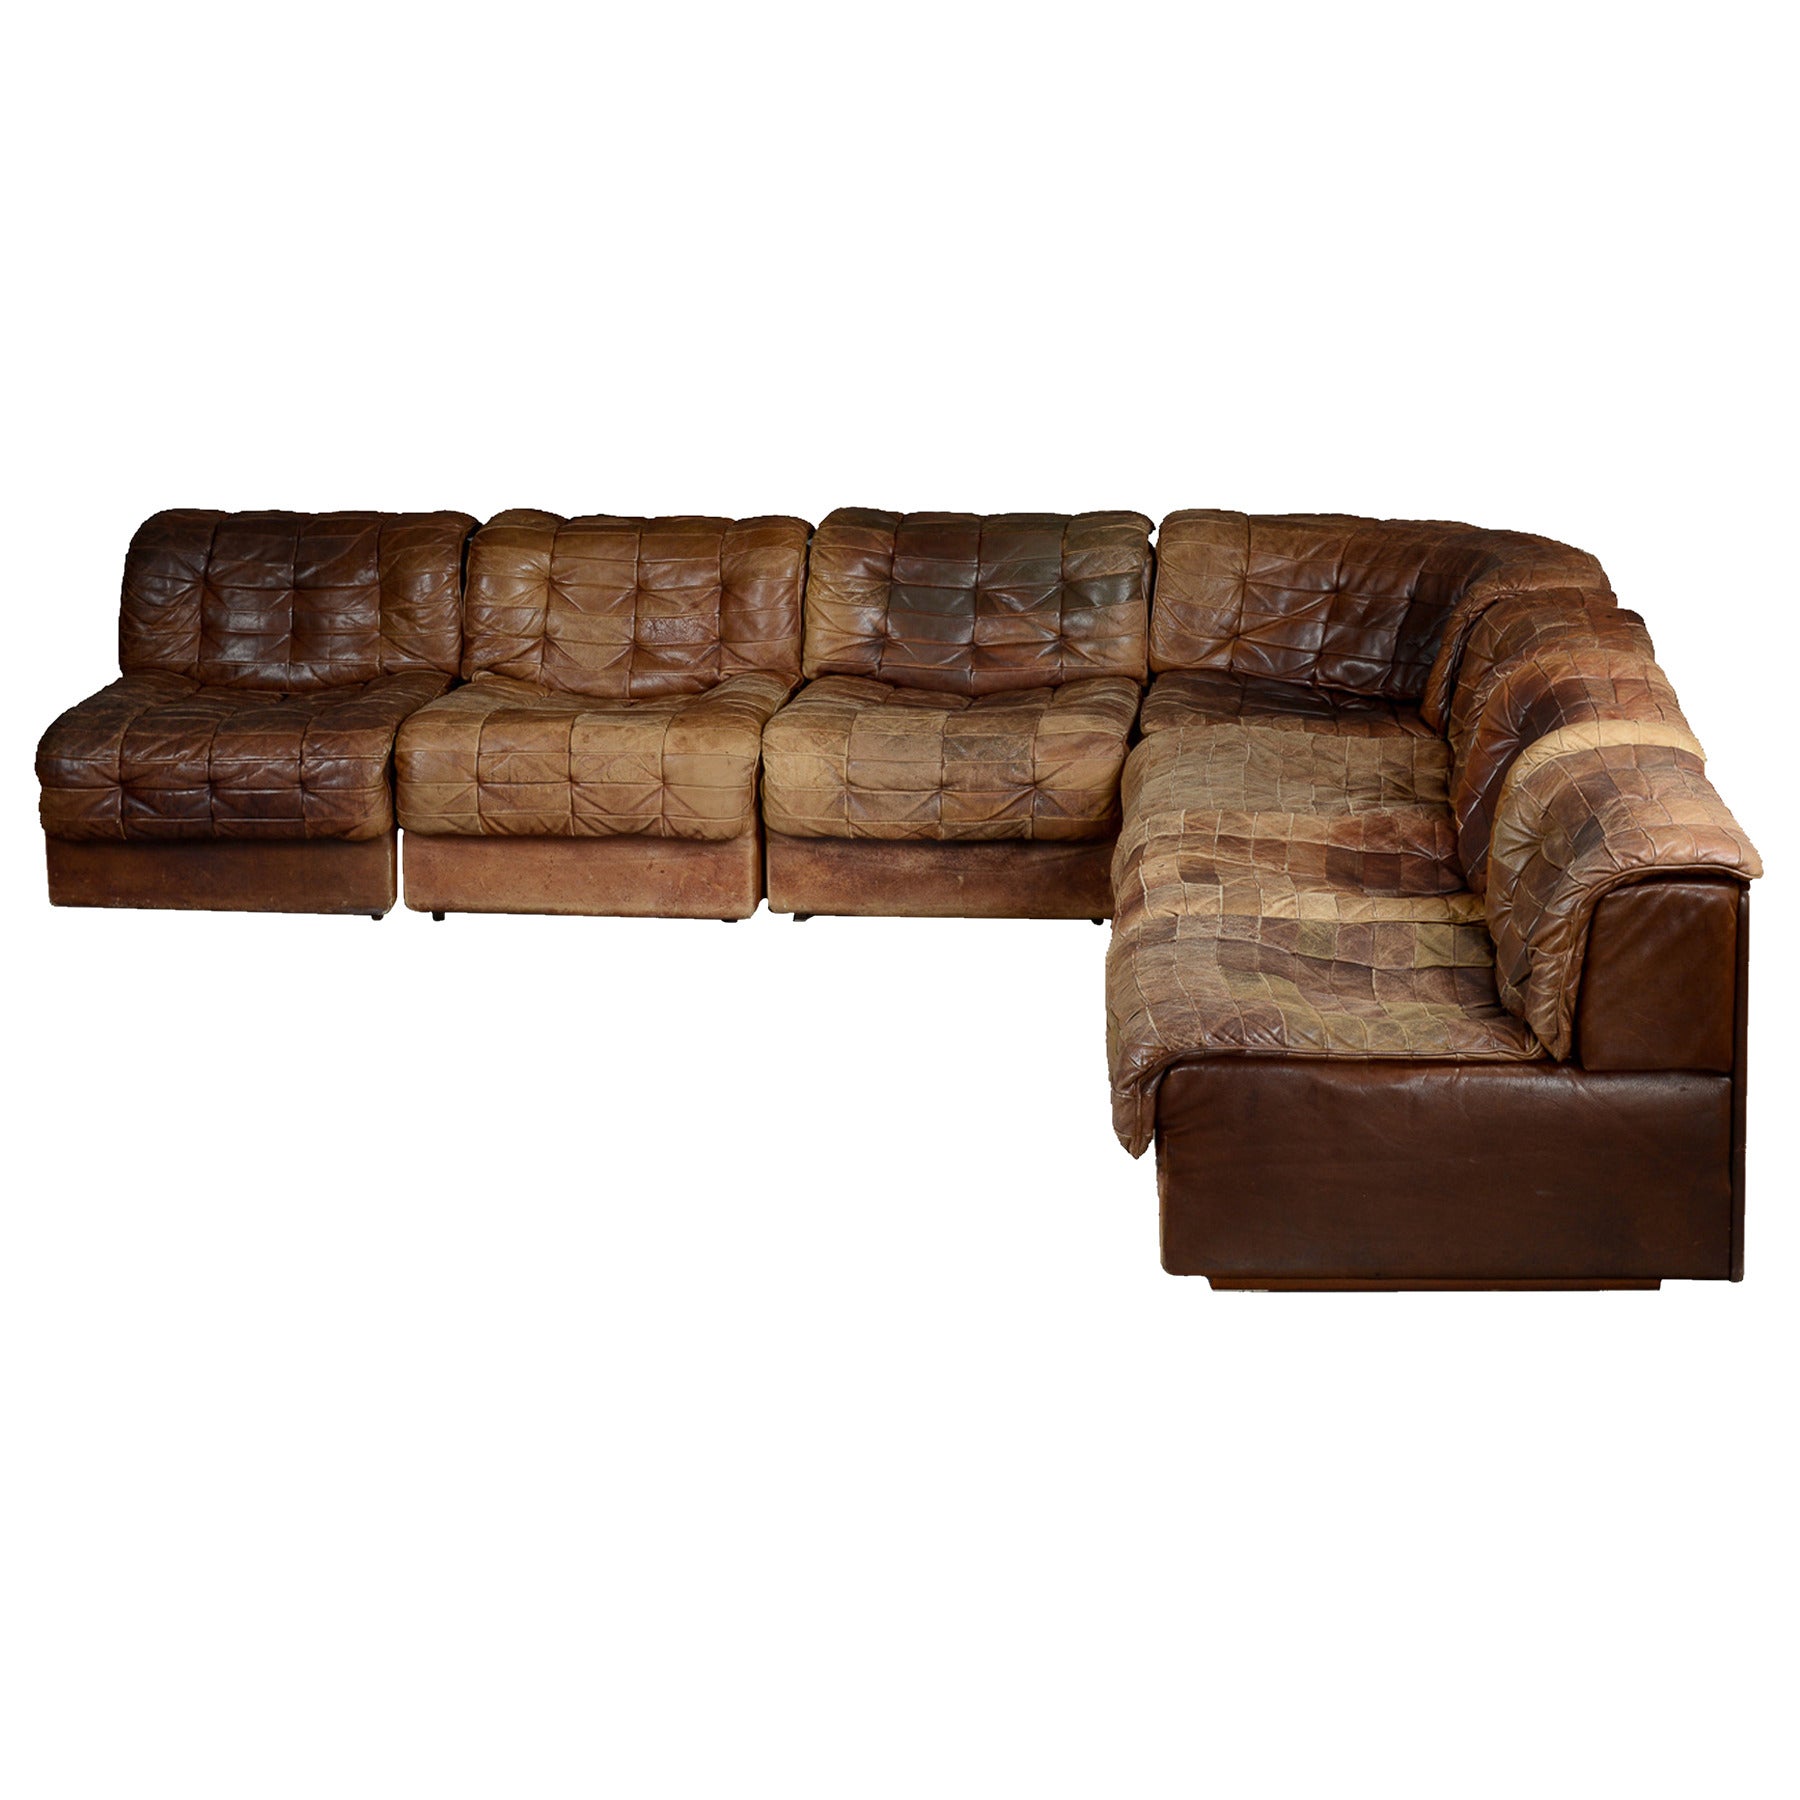 Seven-Section Leather Patchwork Sofa by De Sede